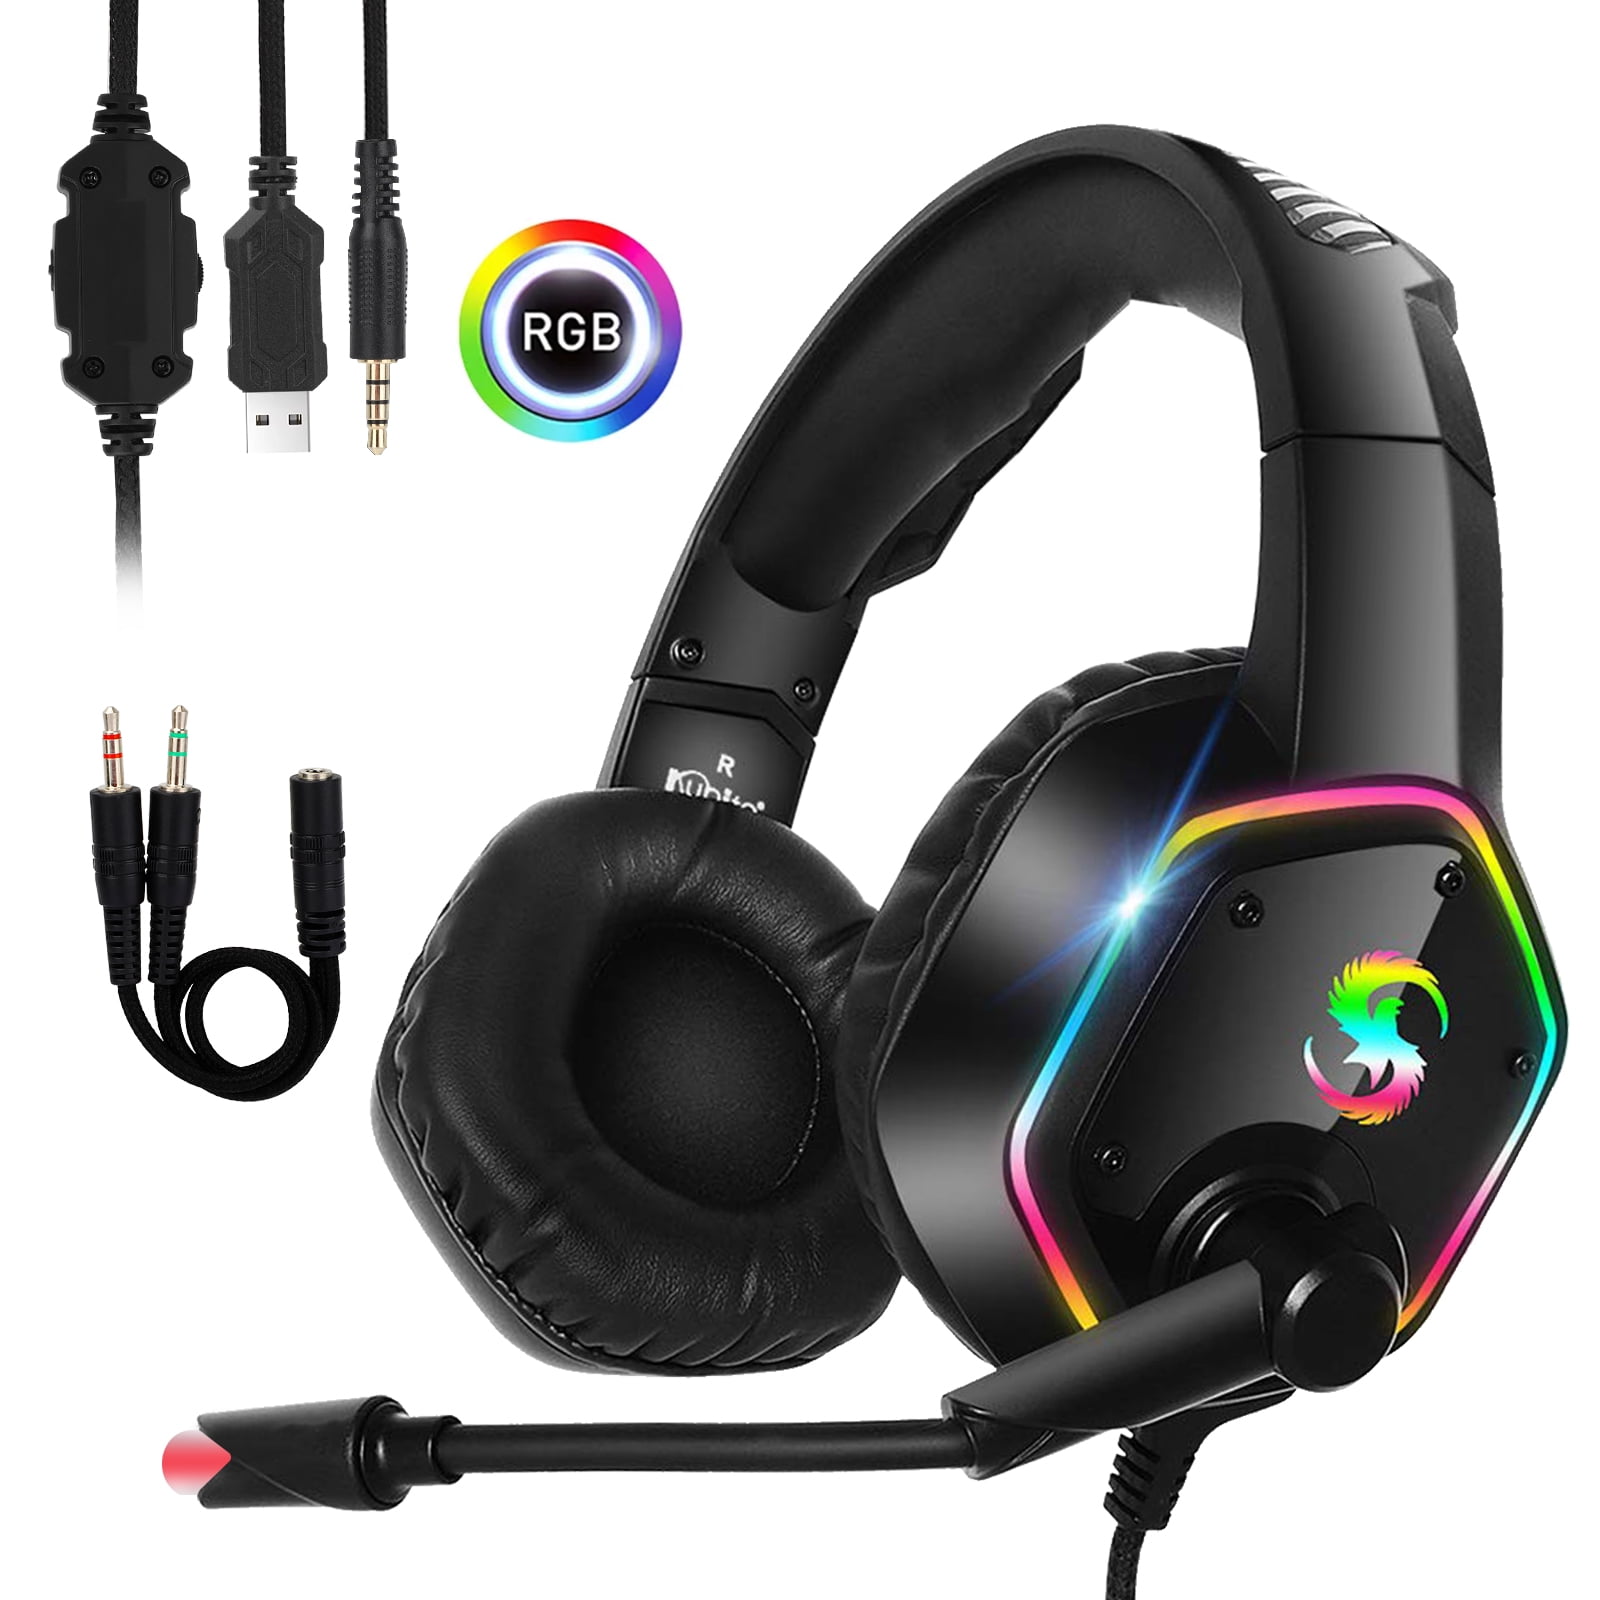 Gaming Headset with Mic for Xbox One PS4 PS5 PC Nintendo Switch Tablet Smartphone, Headphones Stereo Over Ear Bass 3.5mm Microphone Noise Canceling LED Soft Memory Earmuffs - Walmart.com